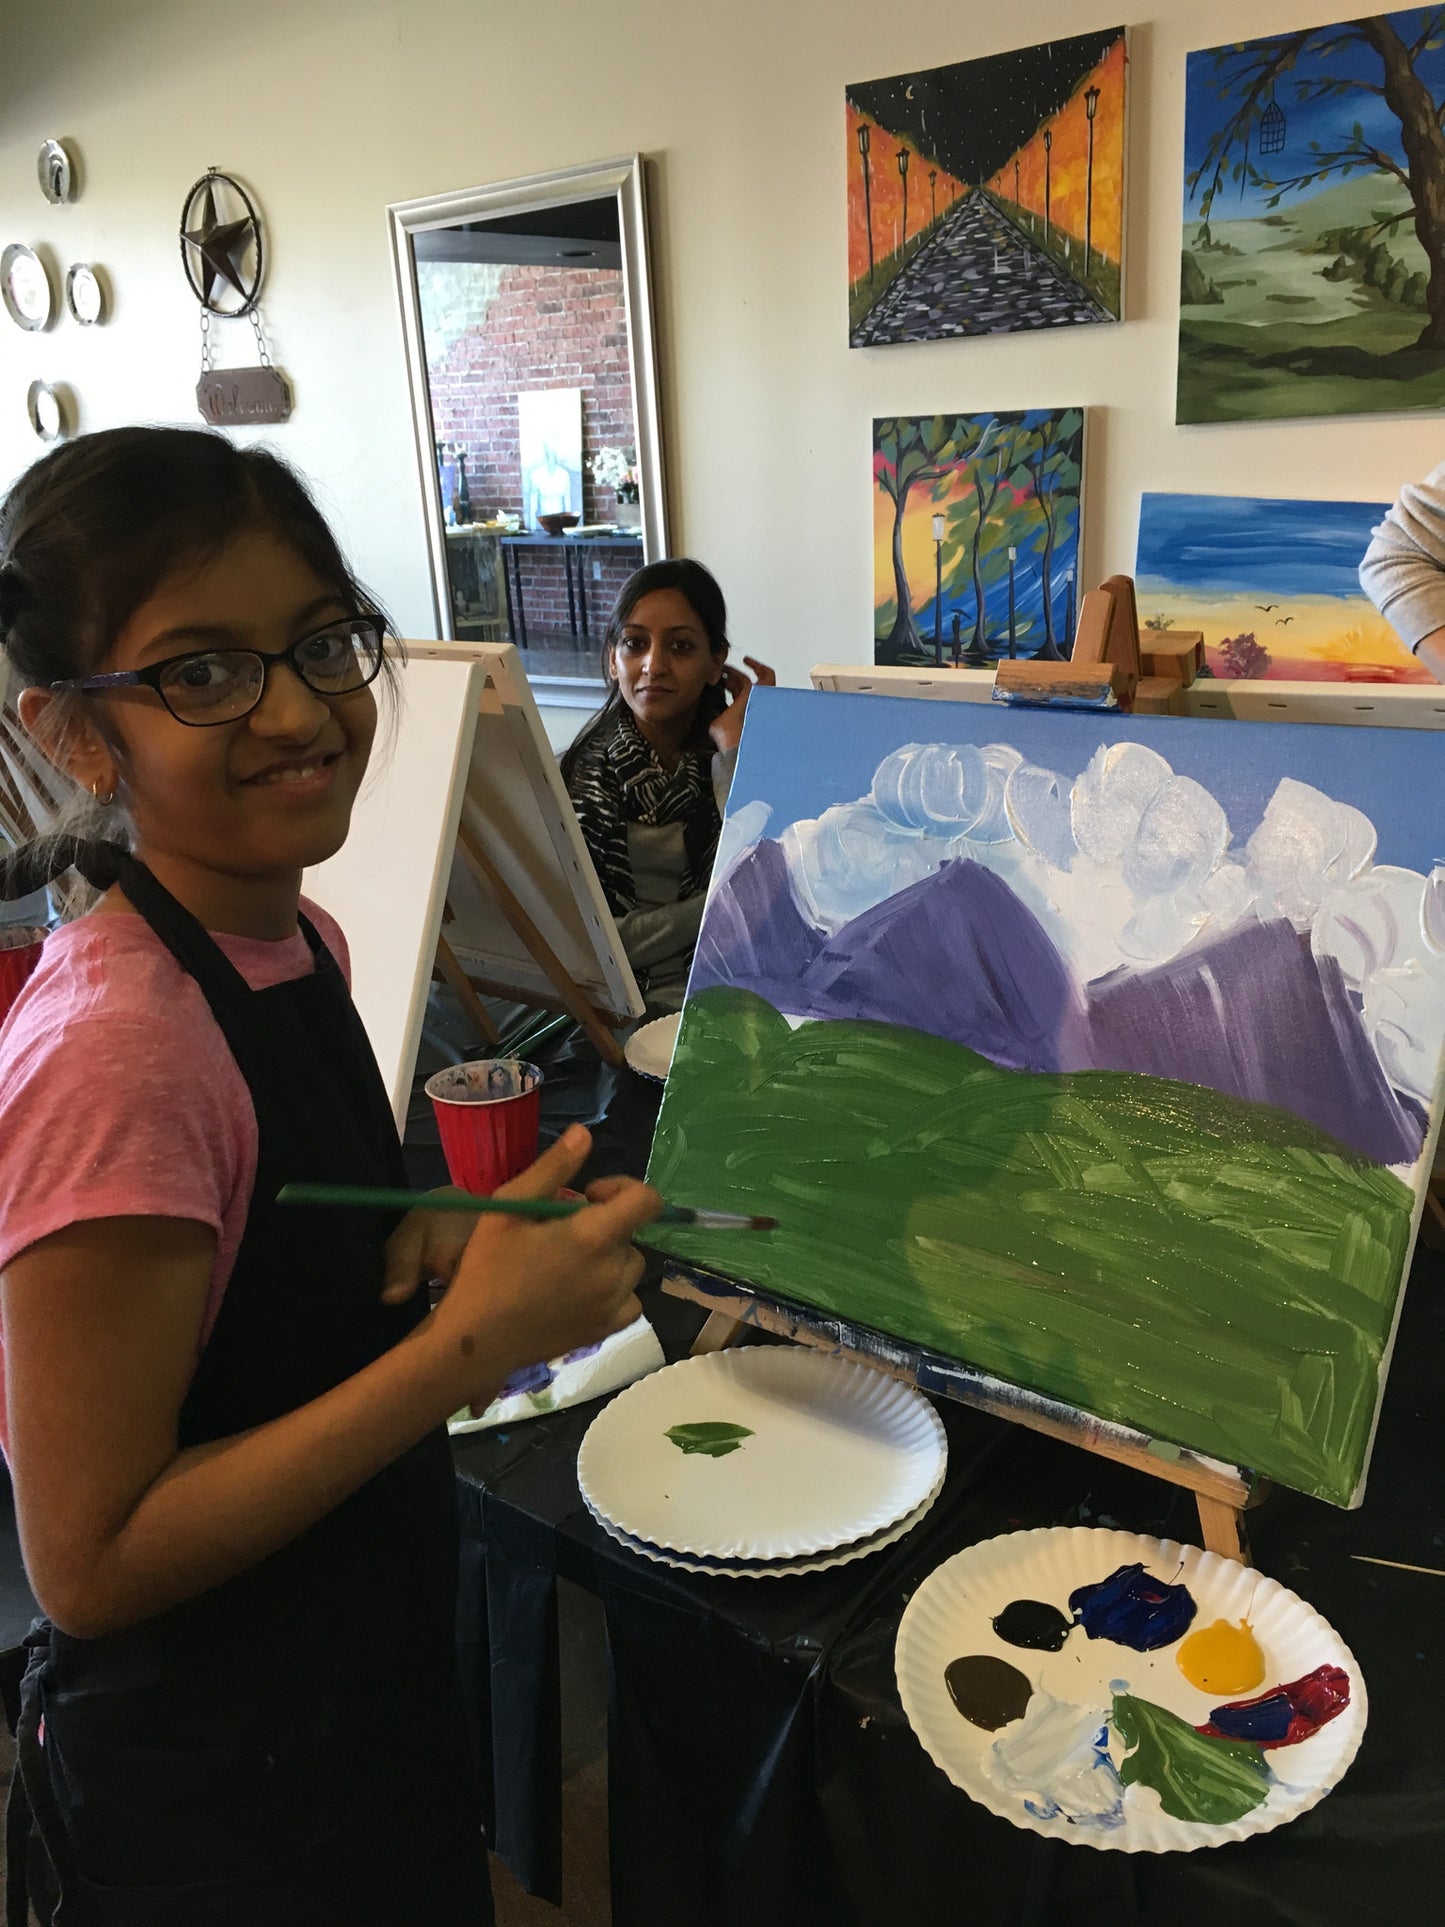 Sun, May 6th, 2-4p “Butterfly Meadow” Private Houston Kids Painting Class